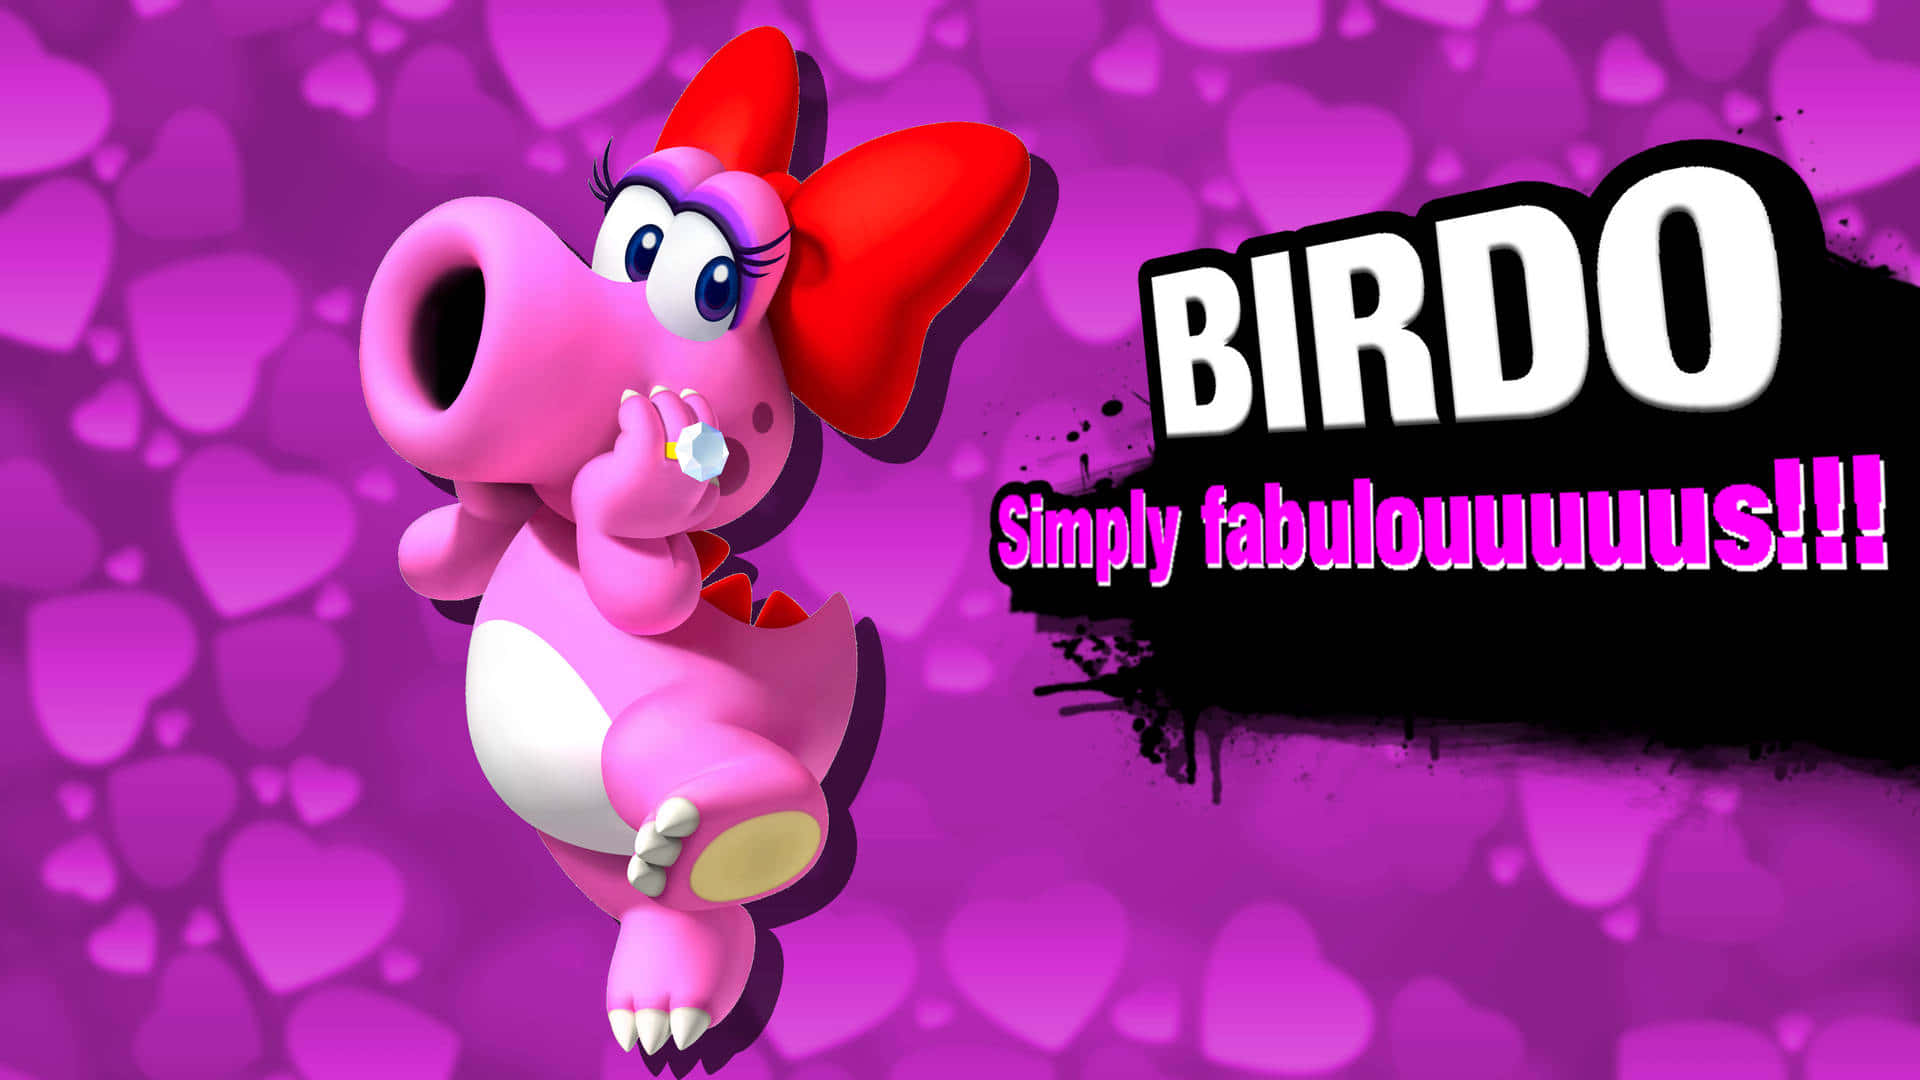 Birdo posing in a colorful gaming background Wallpaper